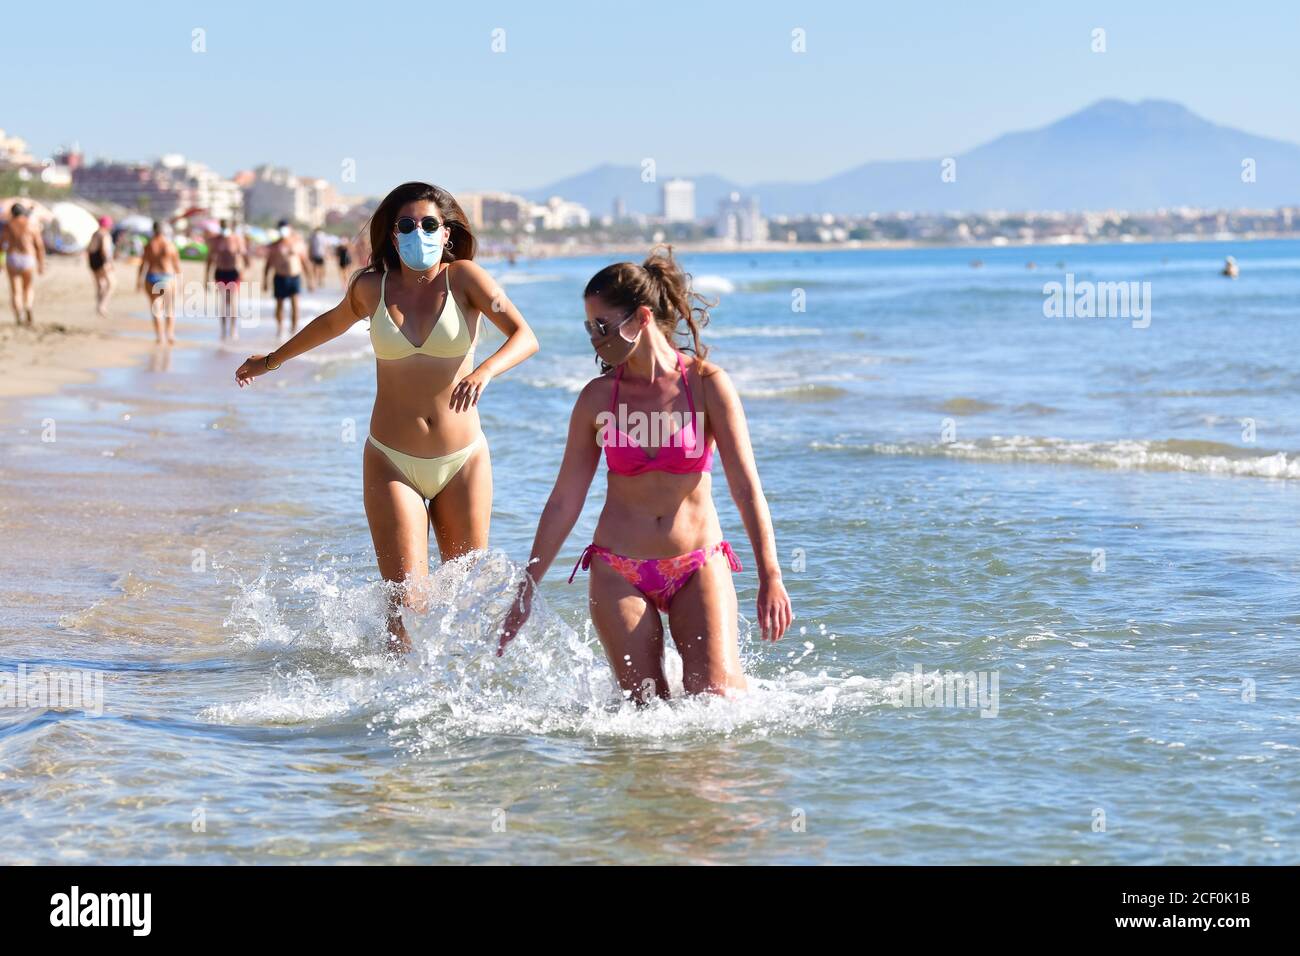 Two Young Girls On The Beach In The Summer Wearing Bikinis Stock Photo,  Picture and Royalty Free Image. Image 18356677.